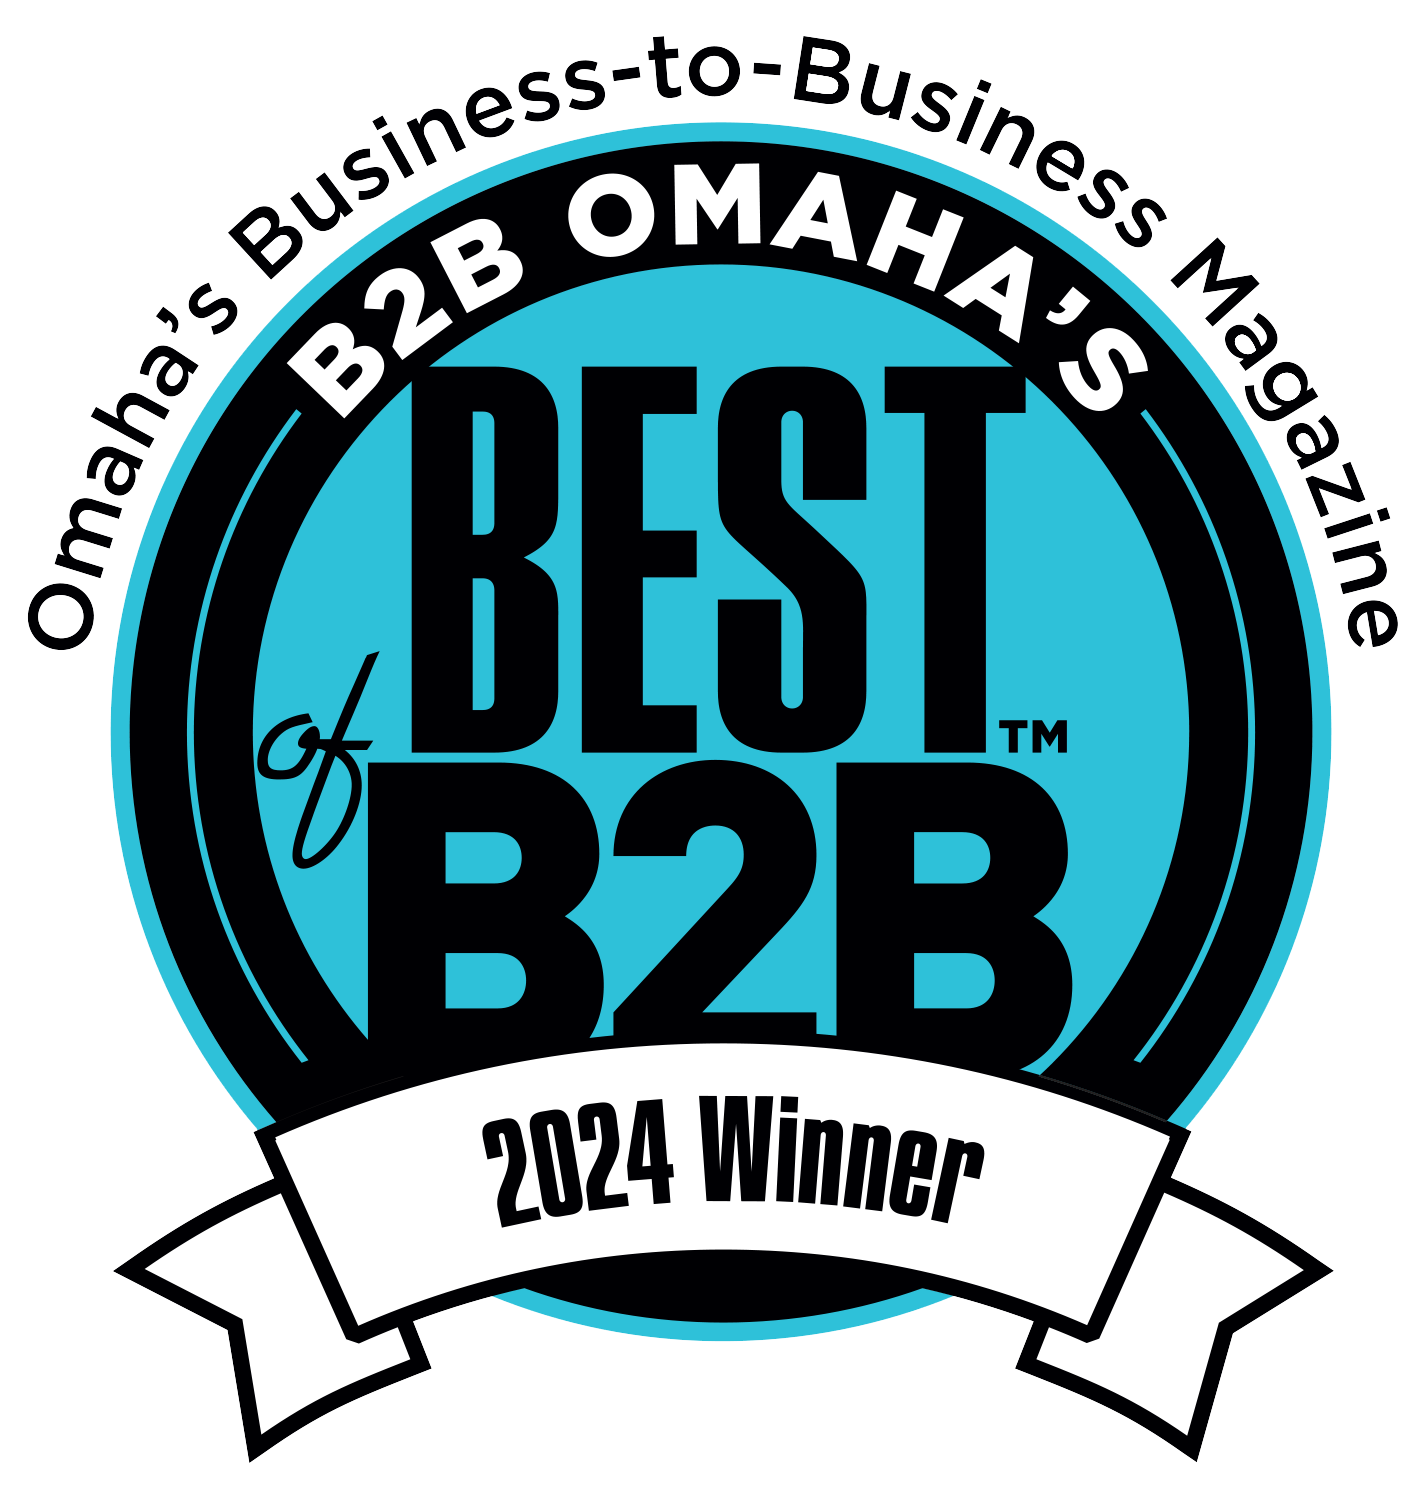 Best of B2B Winner for Networking events